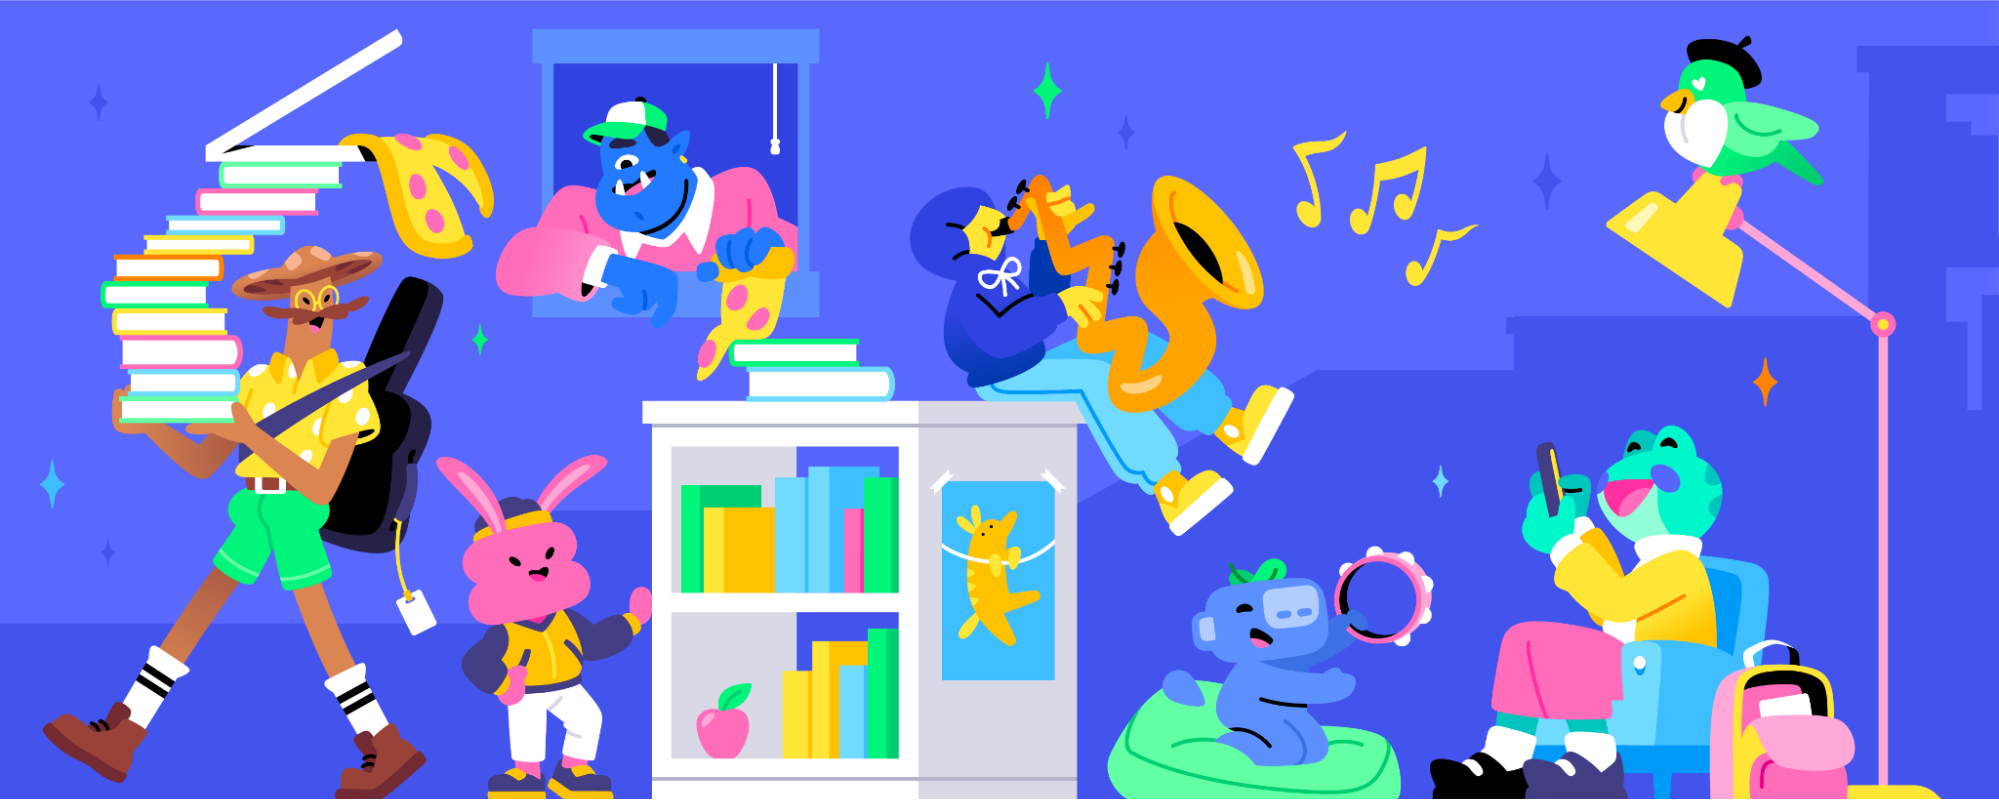 Various Discord characters doing school-themed activities, including playing the saxophone, carrying a stack of books and pizza, and on their phone.